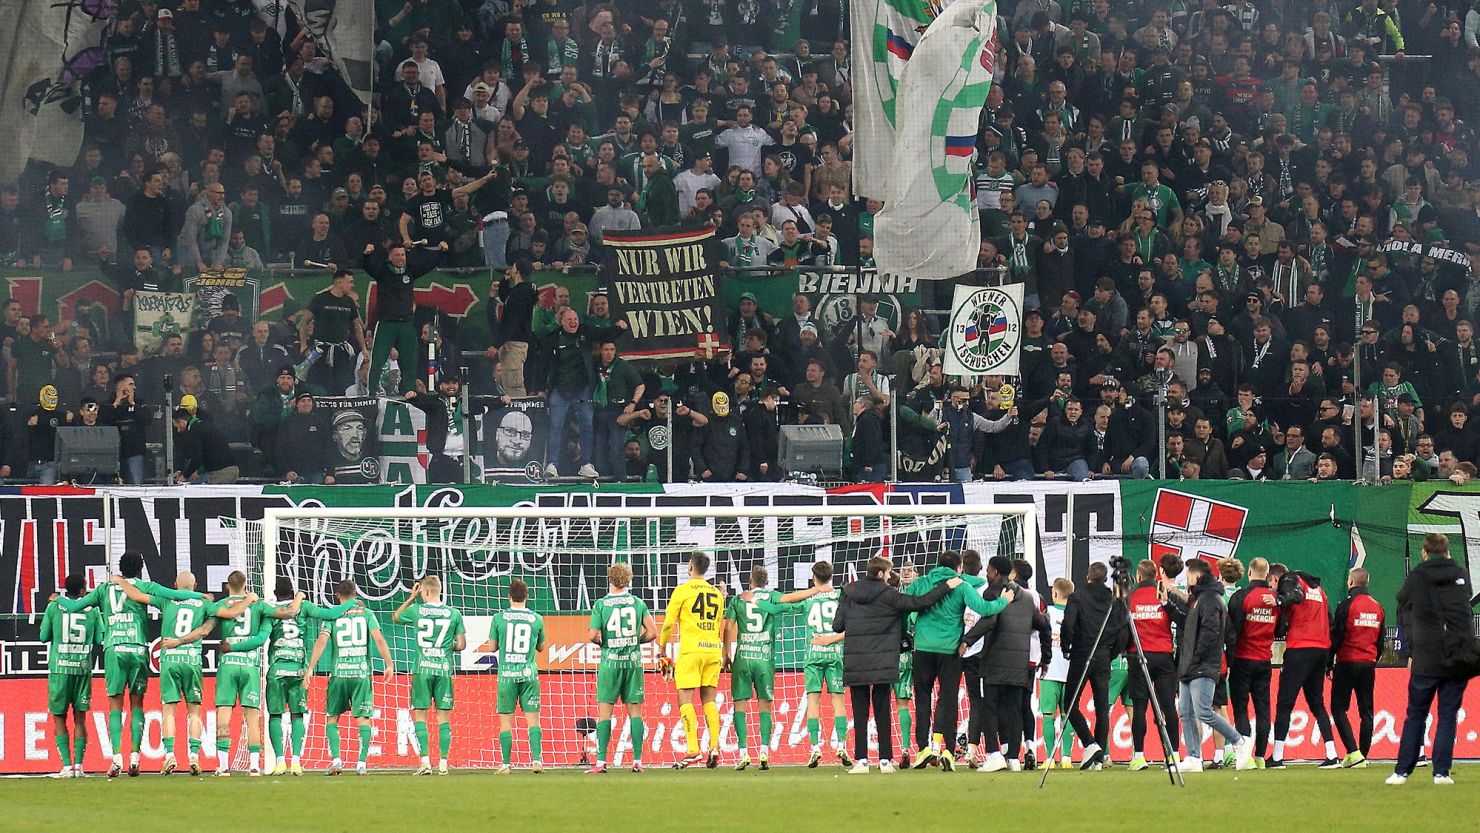 The three Rapid Vienna players took part in the chanting after a game on February 25.